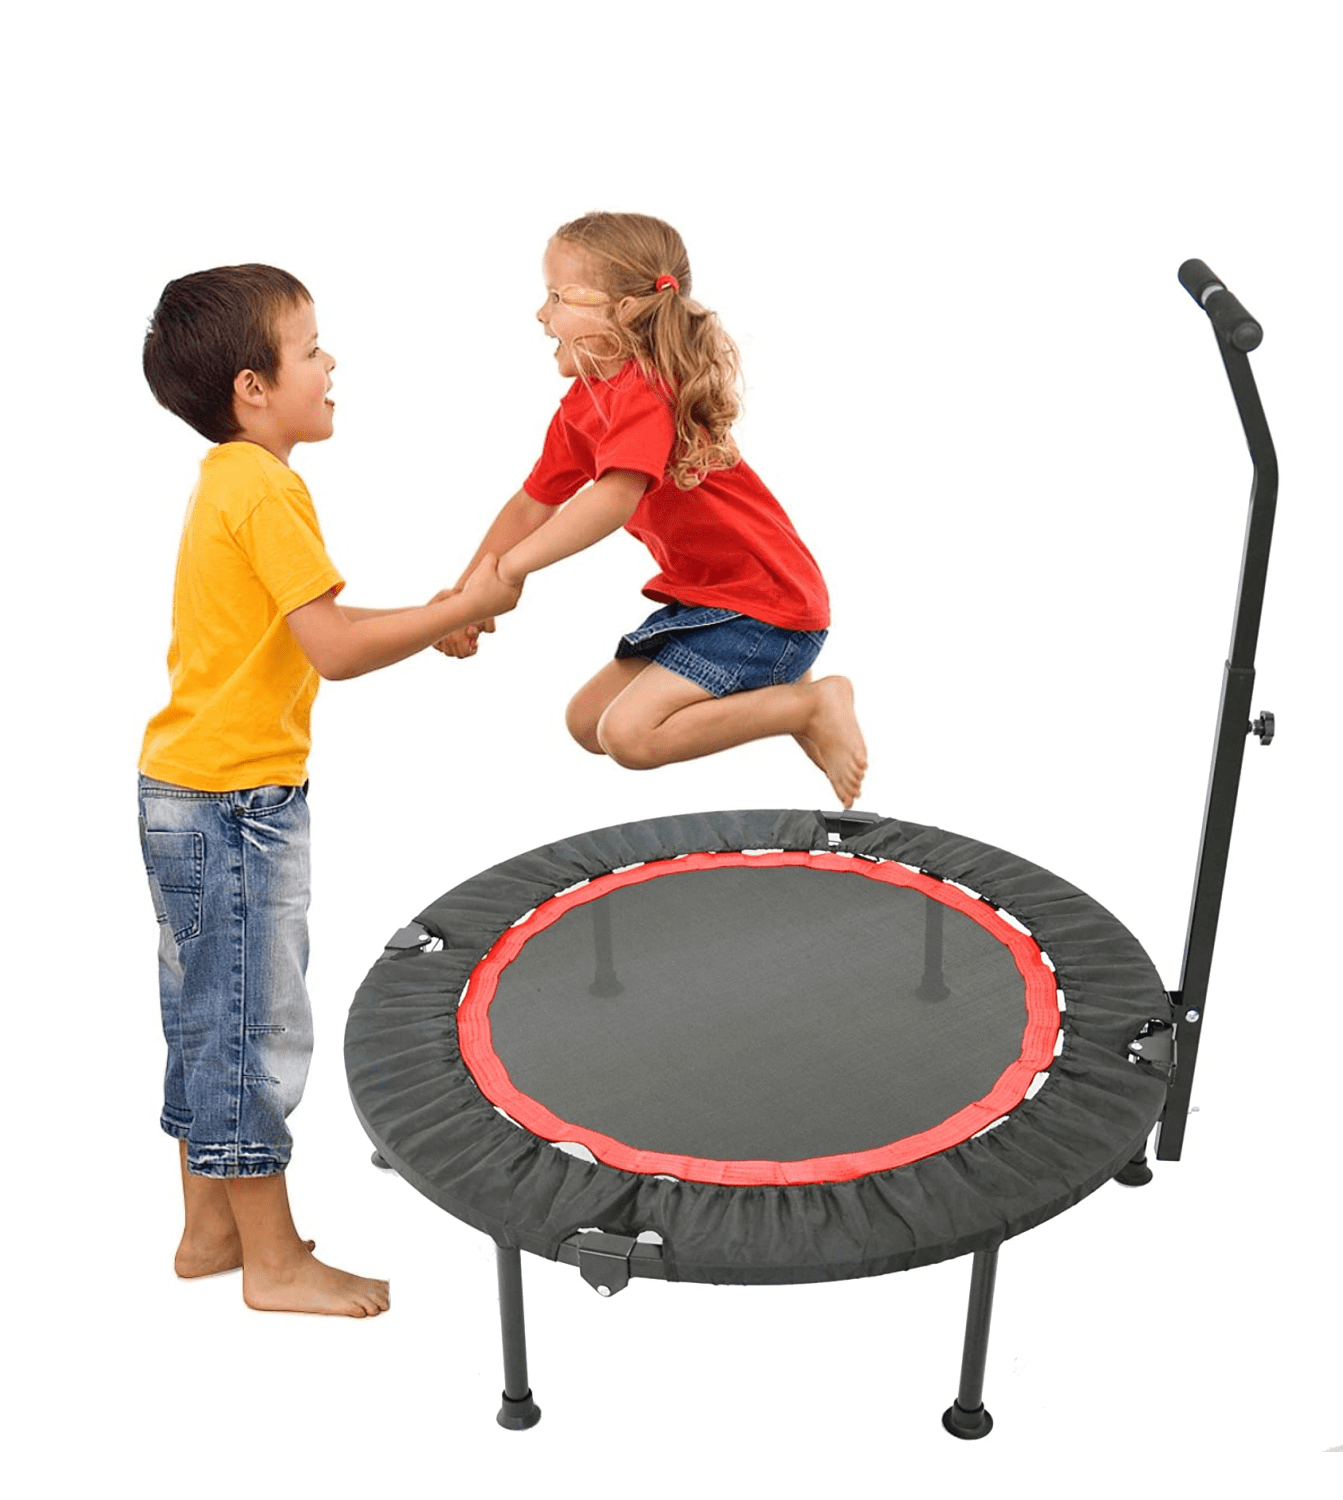 Indoor Outdoor Jumping Cardio Trainer Workout for Kids Adults 40” Mini Fitness Rebounder Max Load 330 lbs Foldable & Portable Exercise Bouncer with Carrying Bag and Safety Pad 